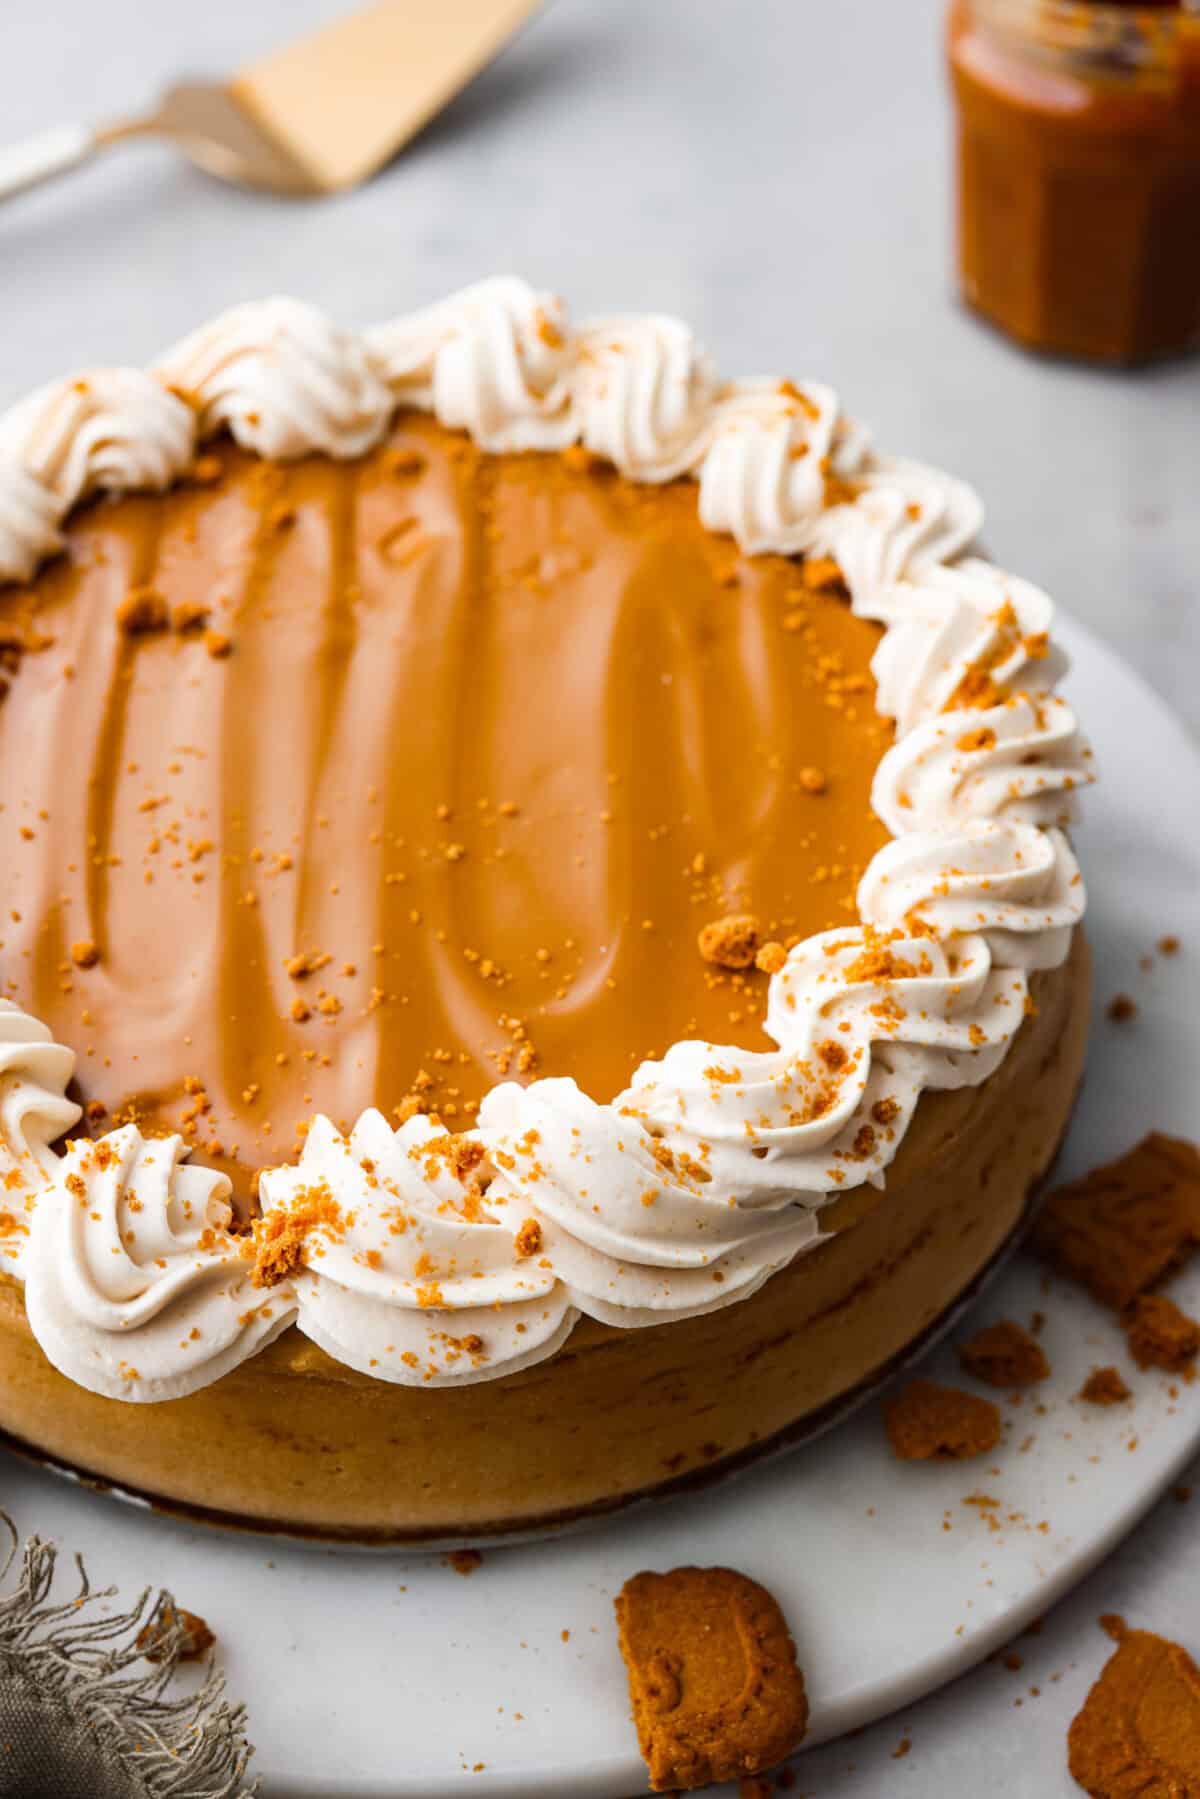 A whole Biscoff cheesecake with whipped cream on top.